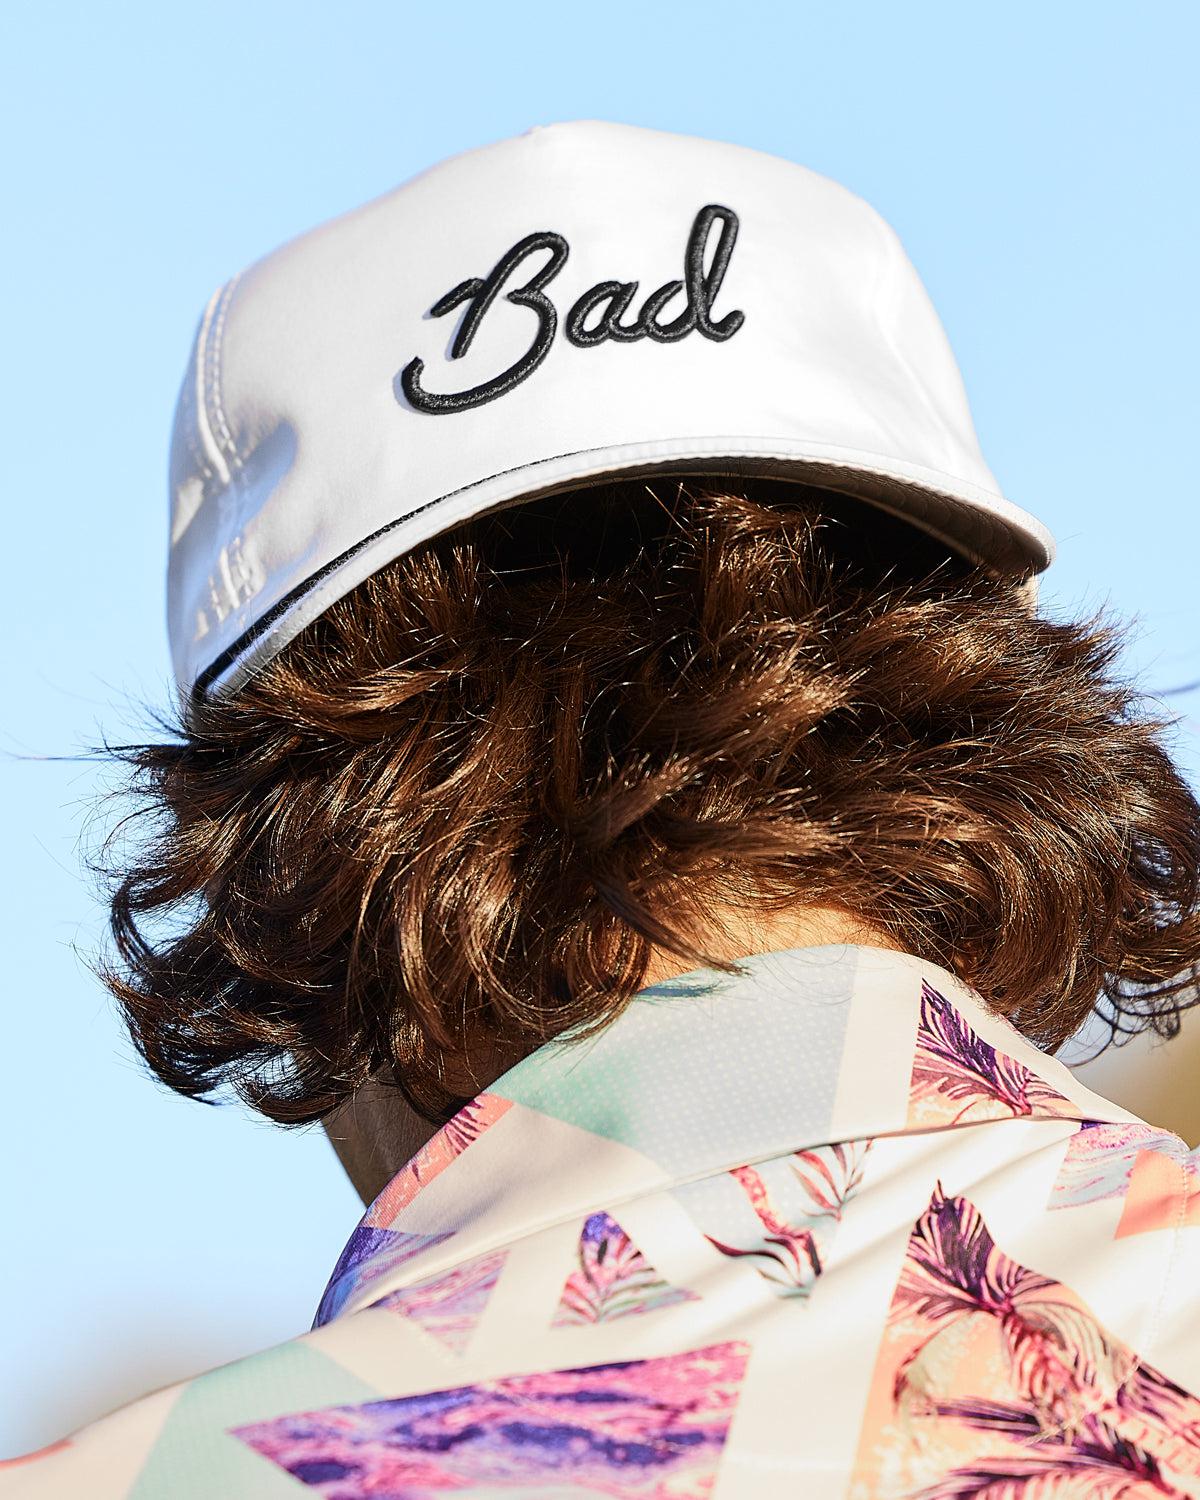 All good things about this Sun Bucket Hat from @Bad Birdie Golf 💁🏻‍